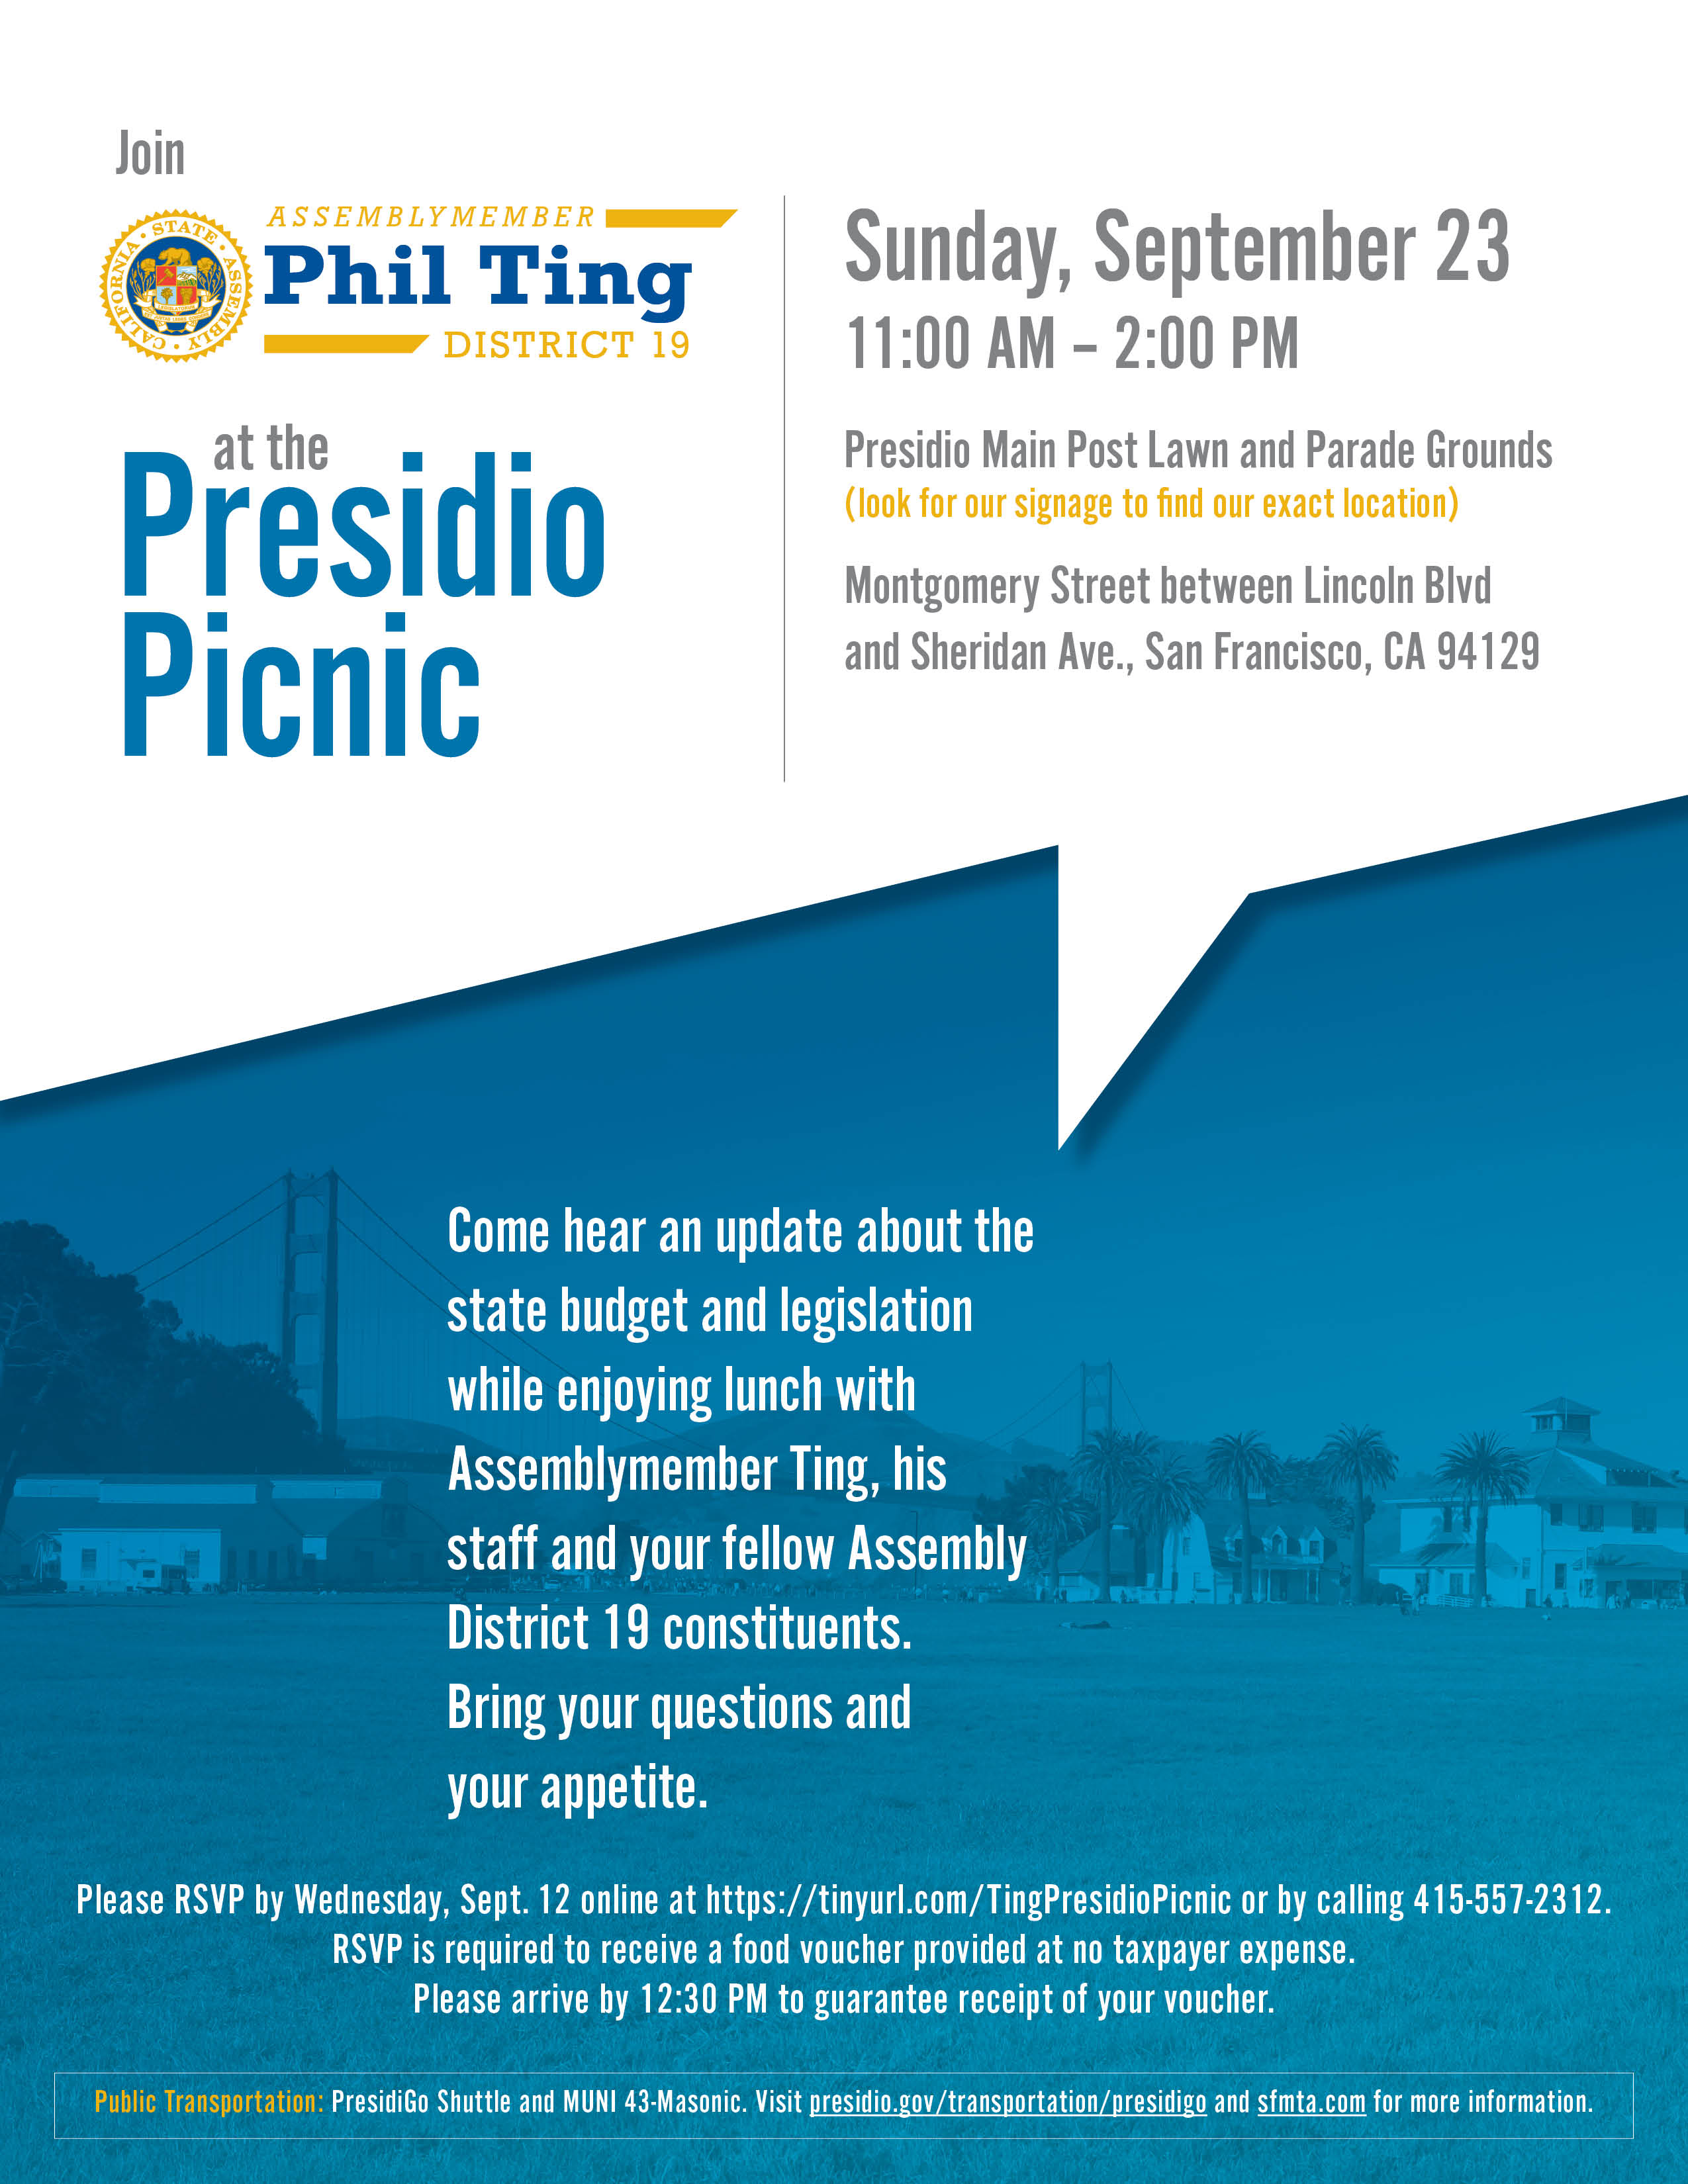 Assemblyman Ting hosts lunch at the Presidio graphic flyer